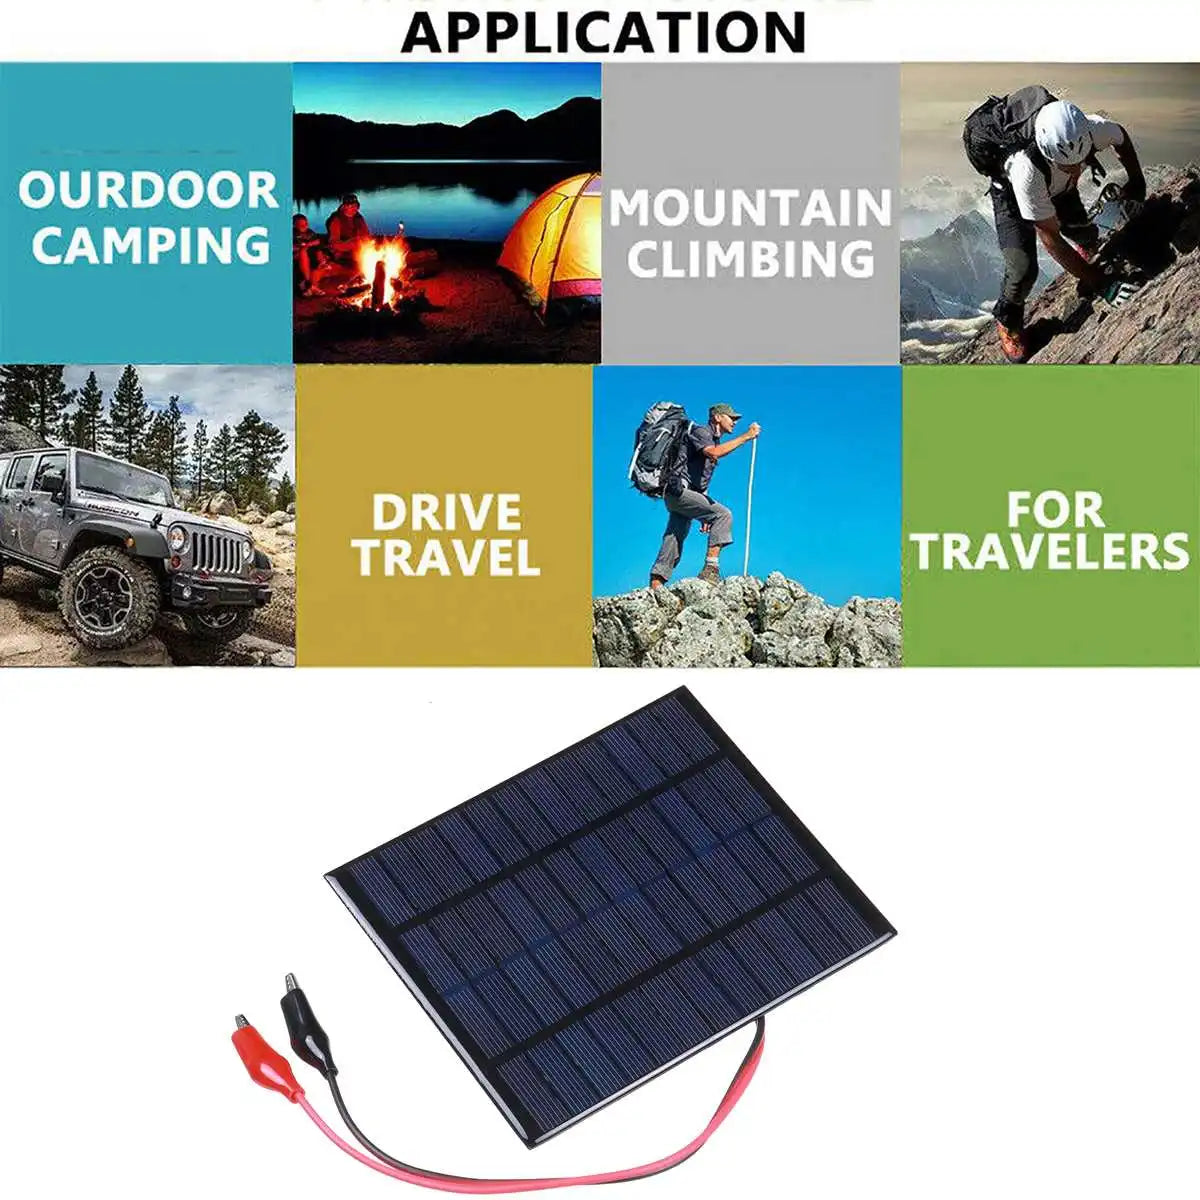 20W Solar Panel, Rugged solar panel for outdoor enthusiasts to power camping gear, lights, and devices.